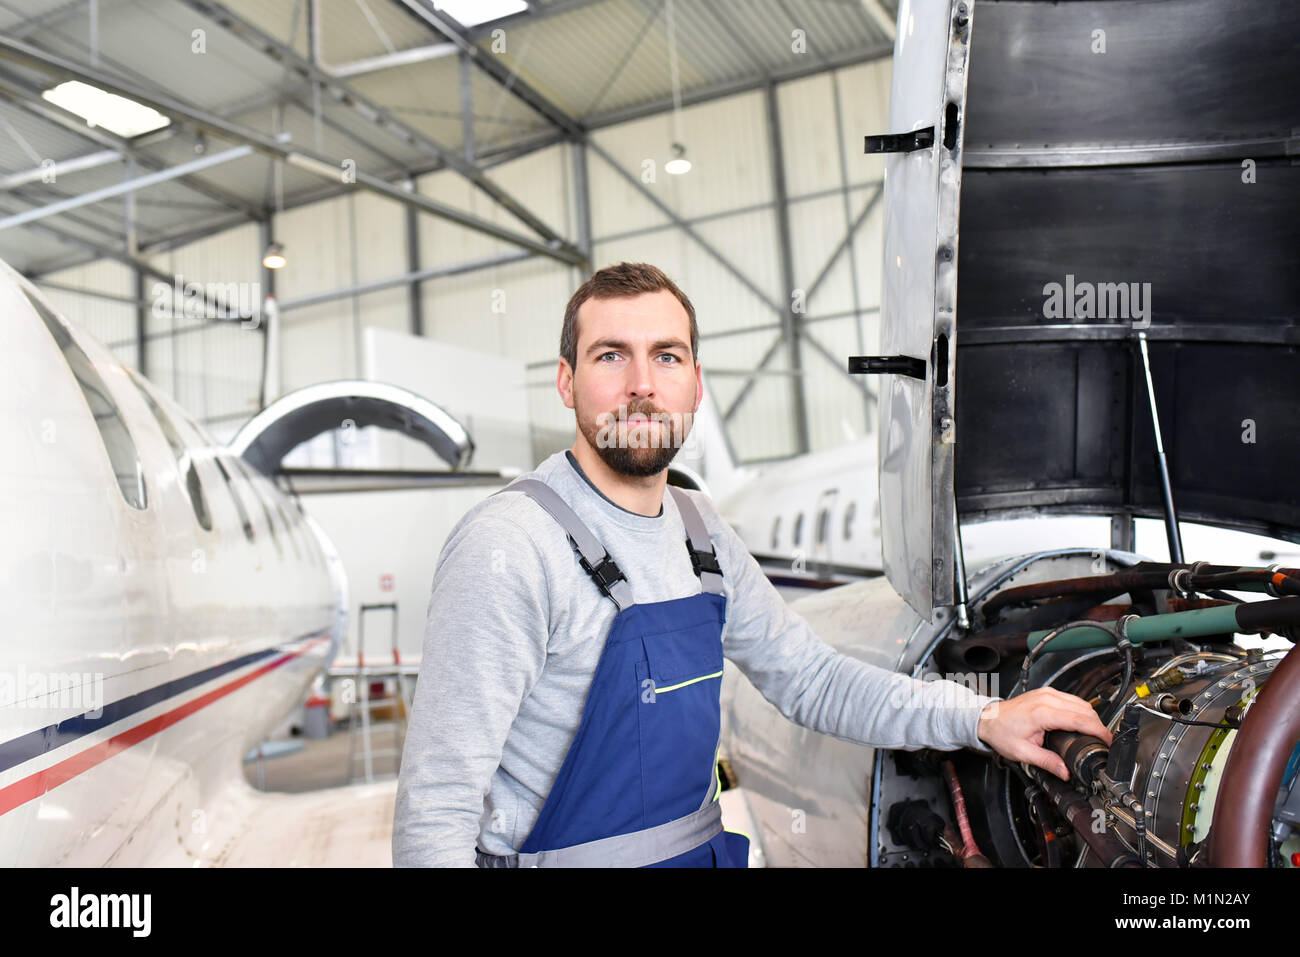 Portrait of an aircraft mechanic in a hangar with jets at the airport - Checking the aircraft for safety and technical function Stock Photo